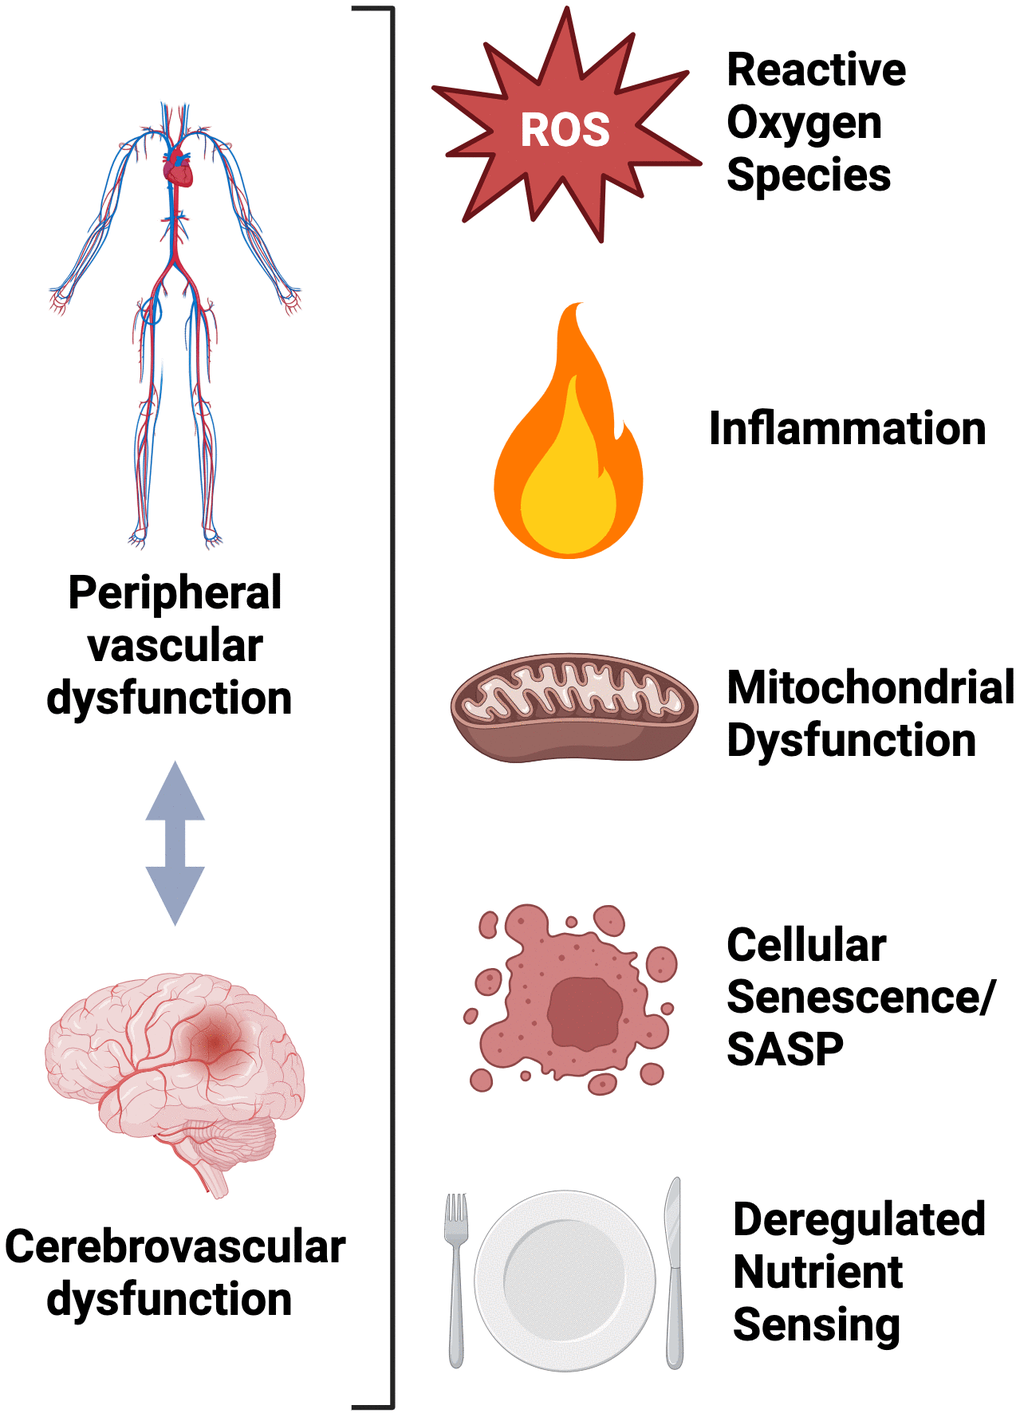 Molecular and cellular mechanisms shared between peripheral and cerebrovascular dysfunction.